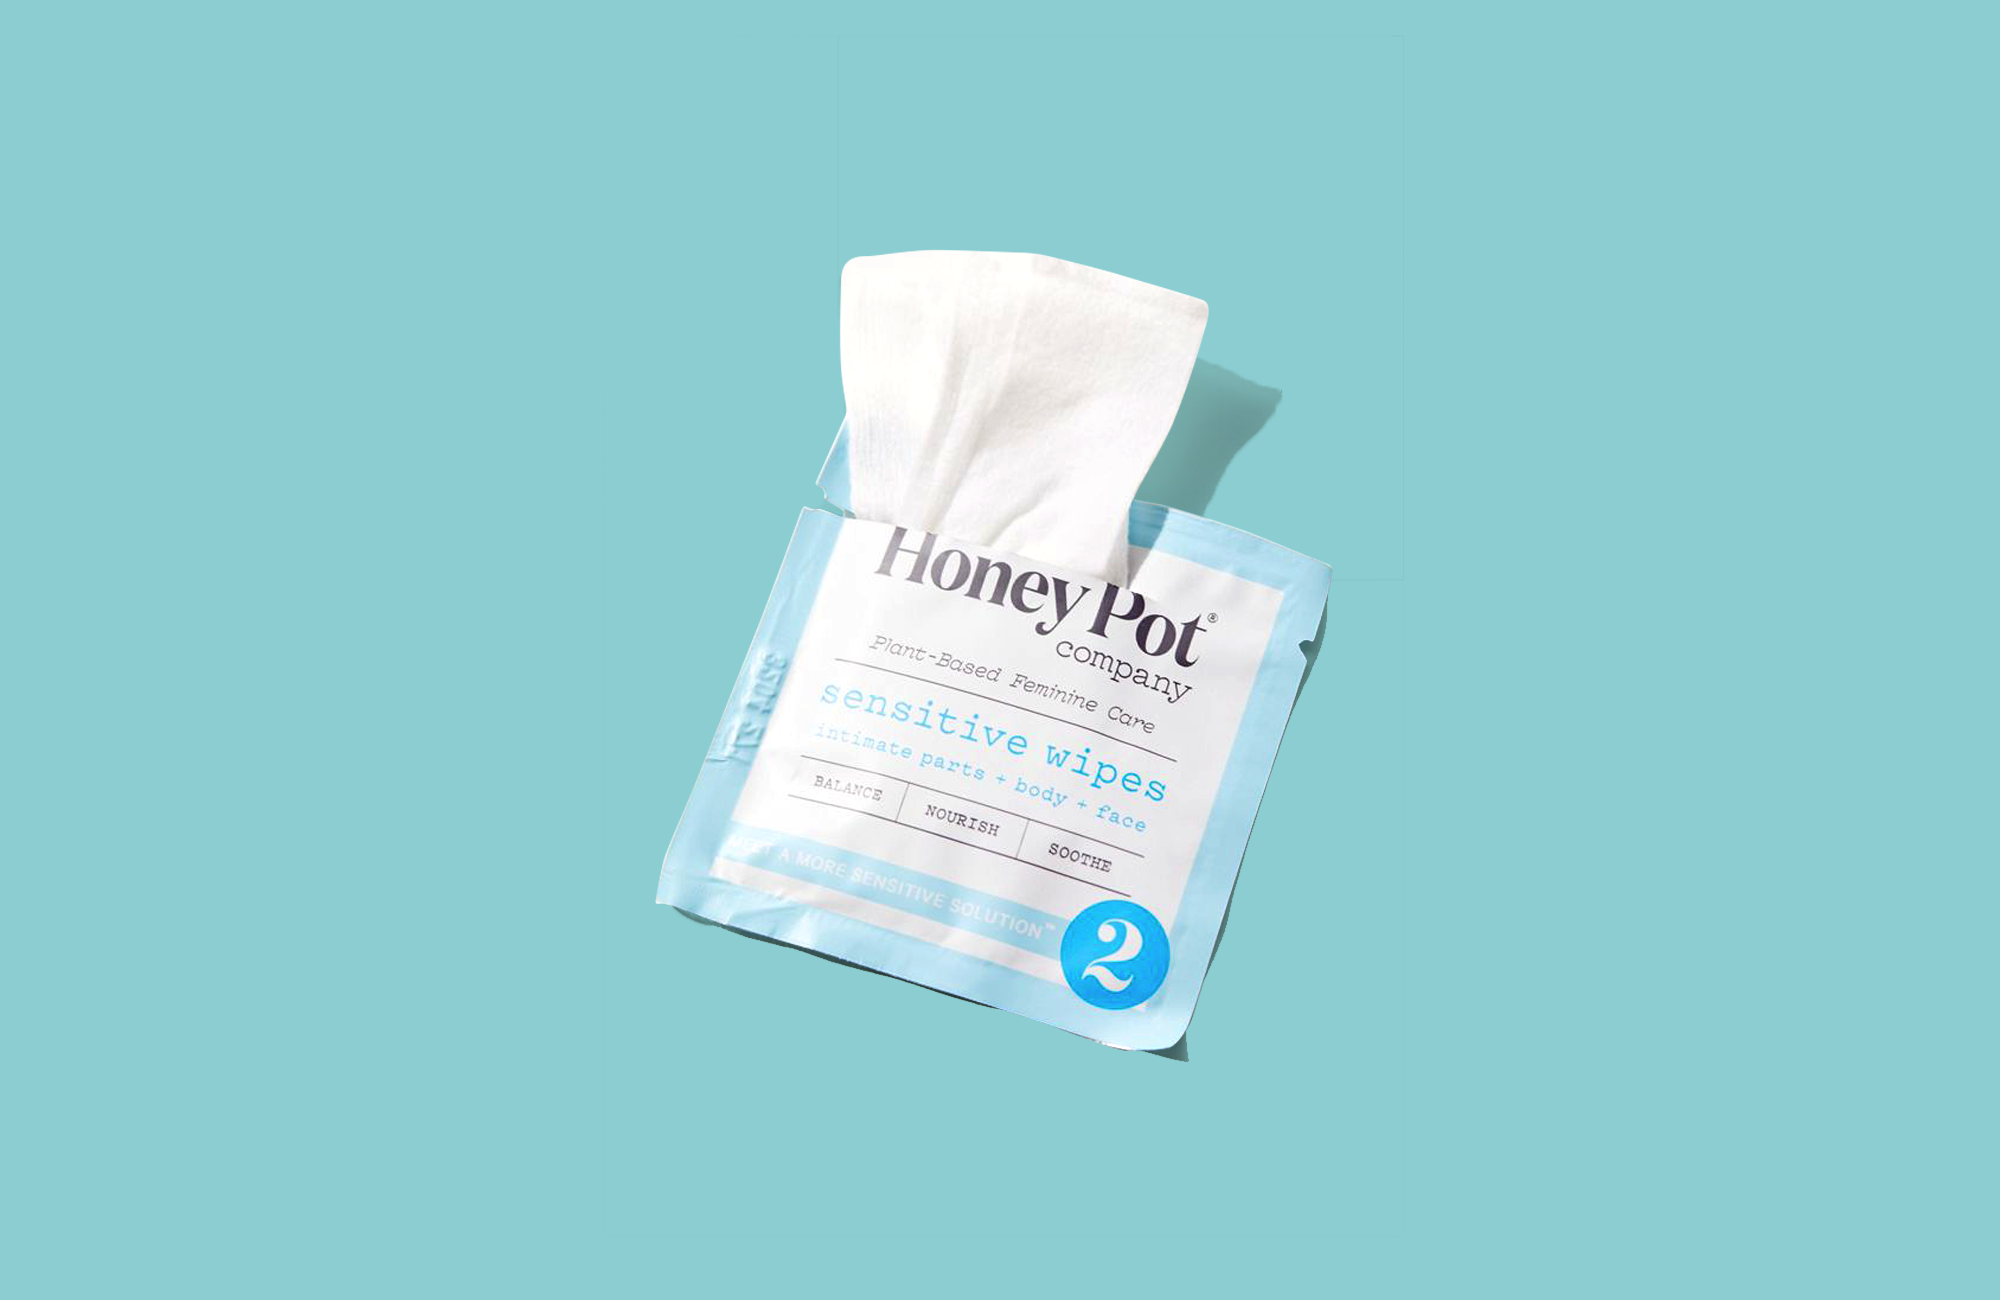 Honeypot sensitive wipes are useful for periods